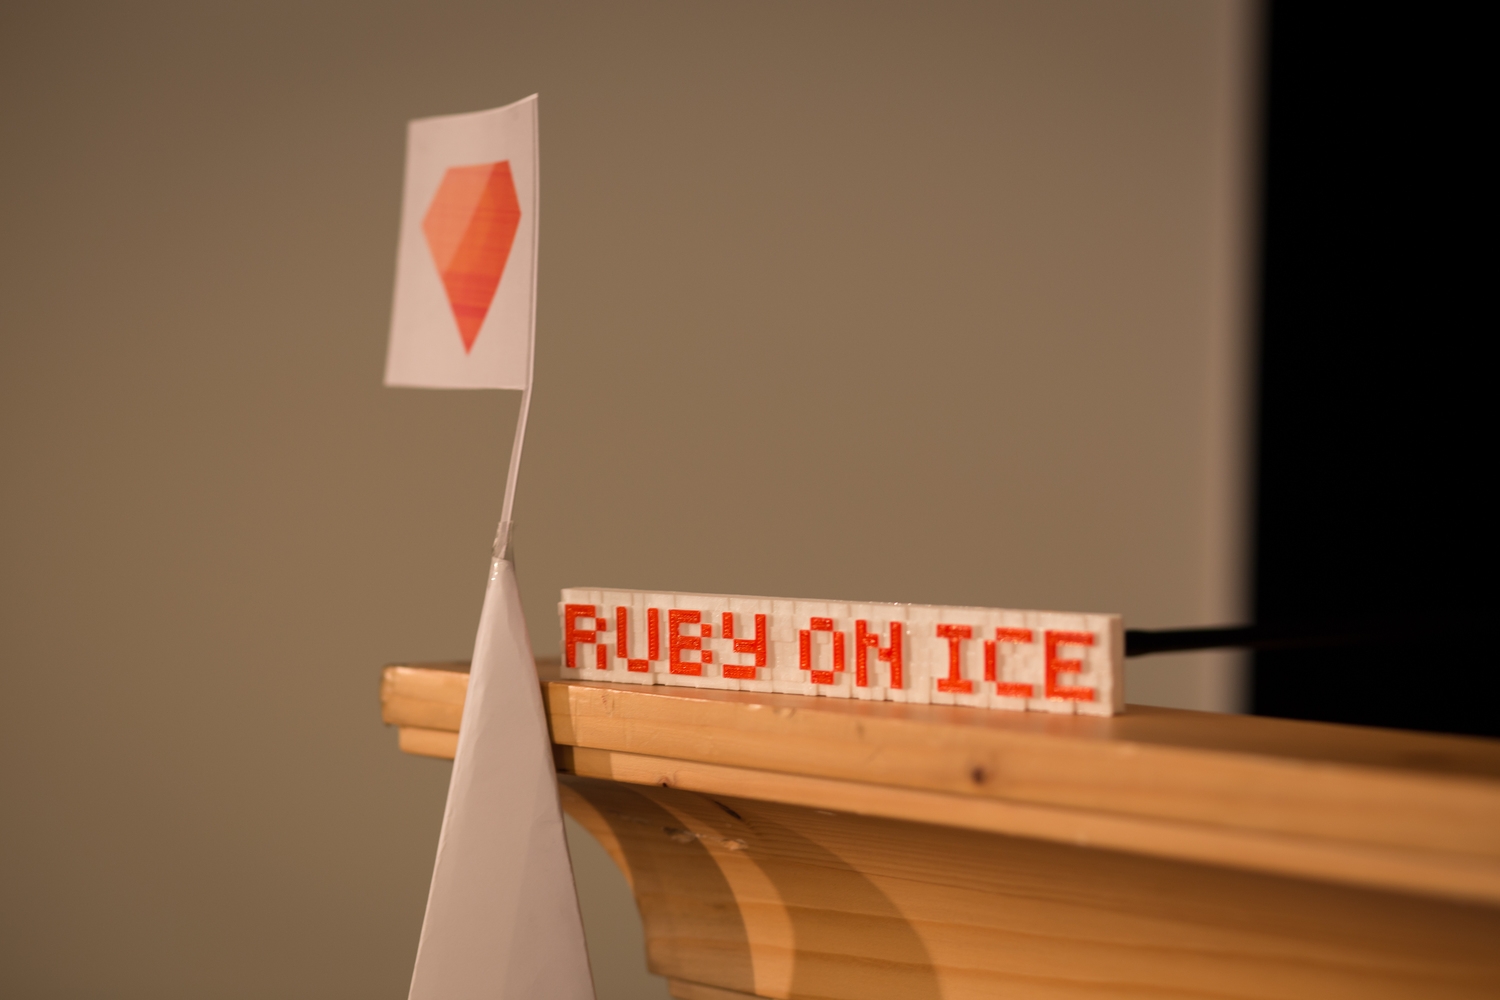 Ruby on ice 048